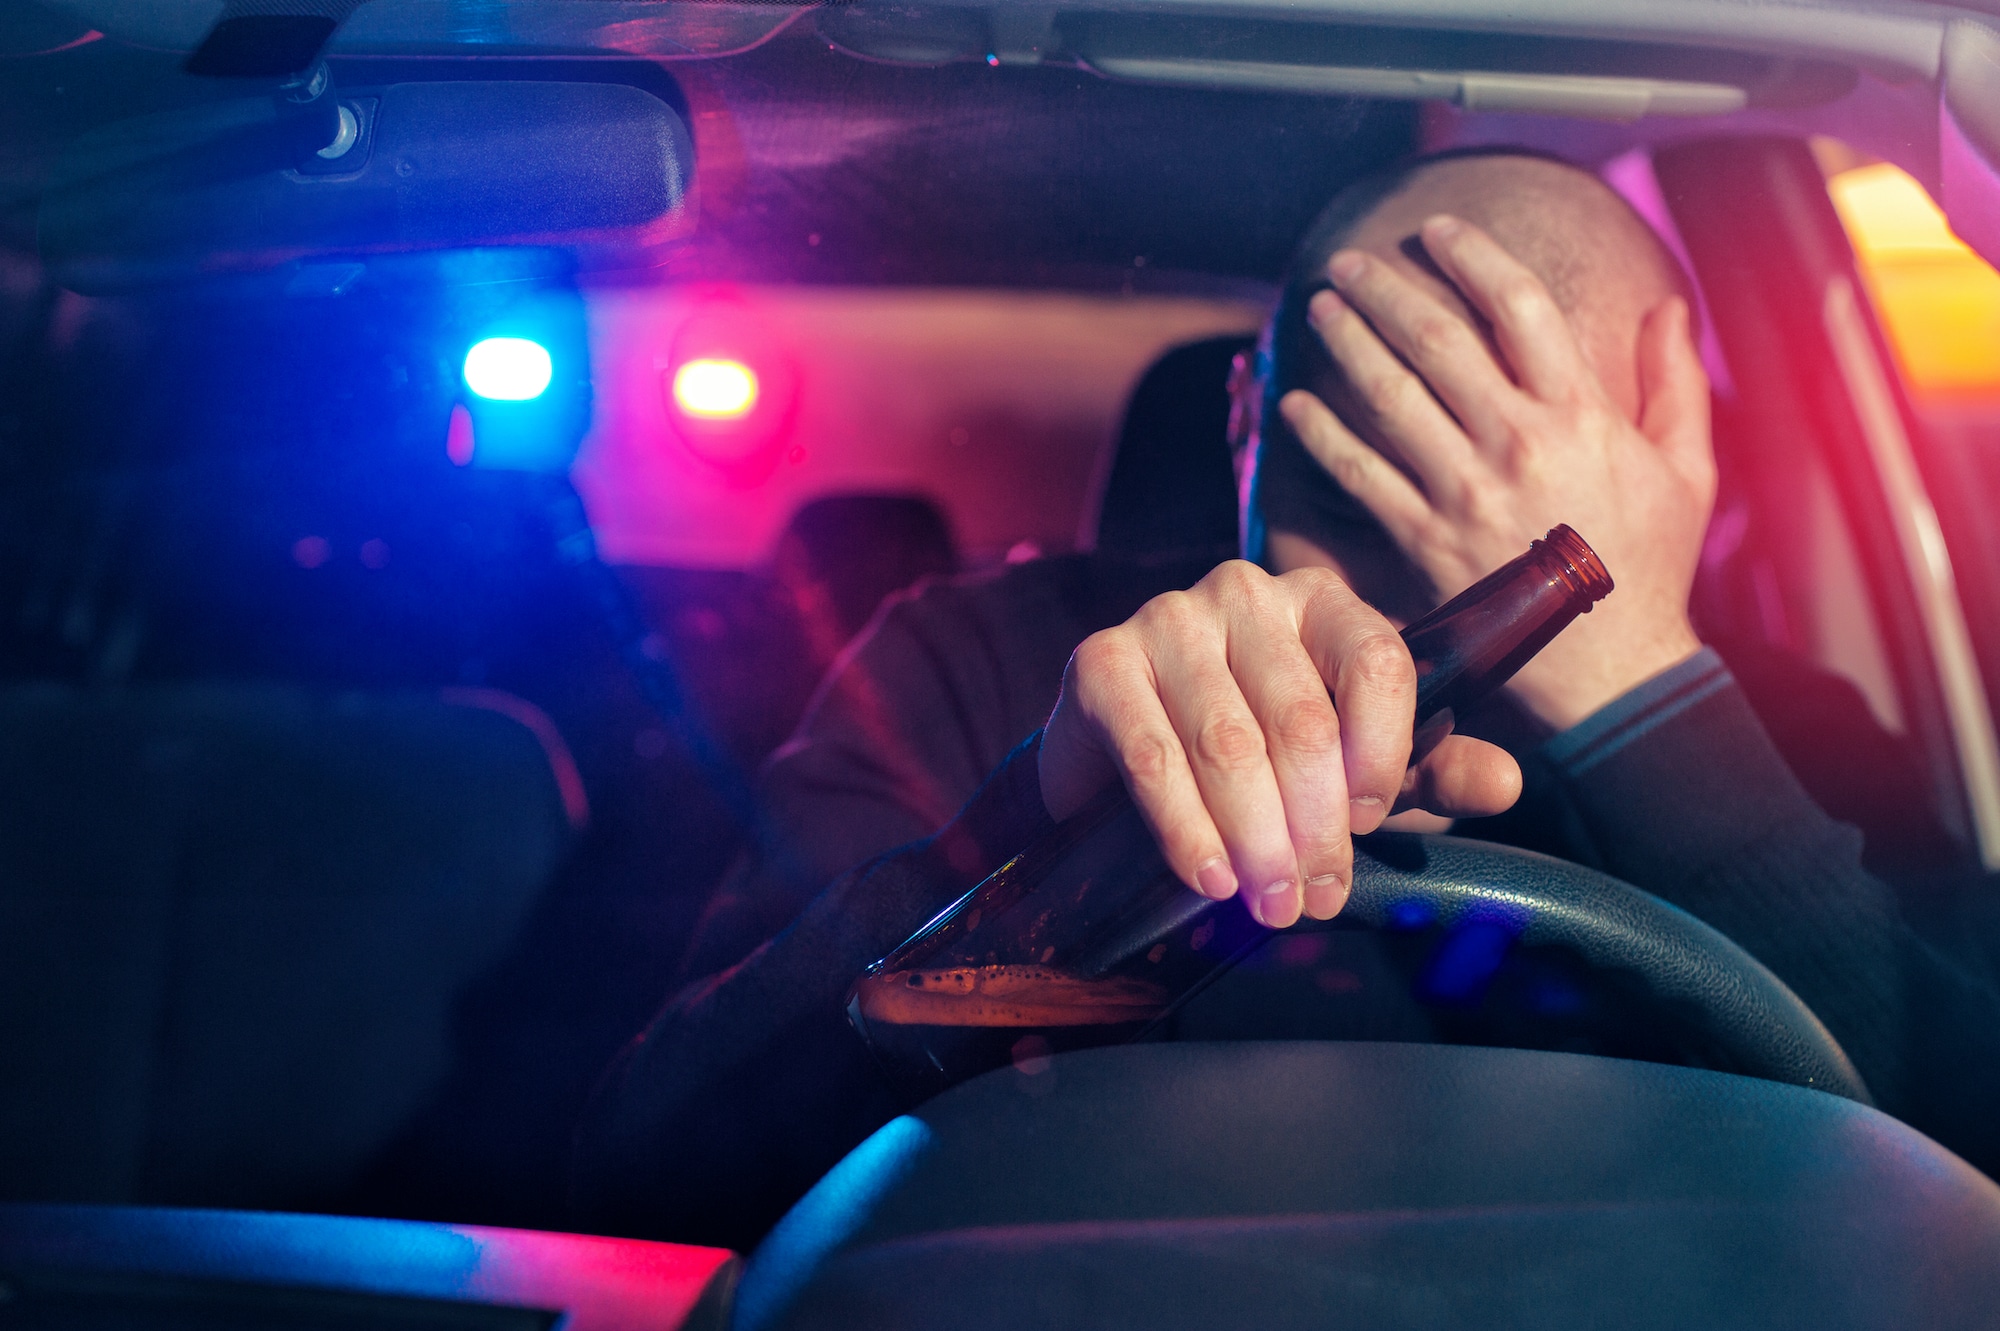 dui conviction in drunk driving cases